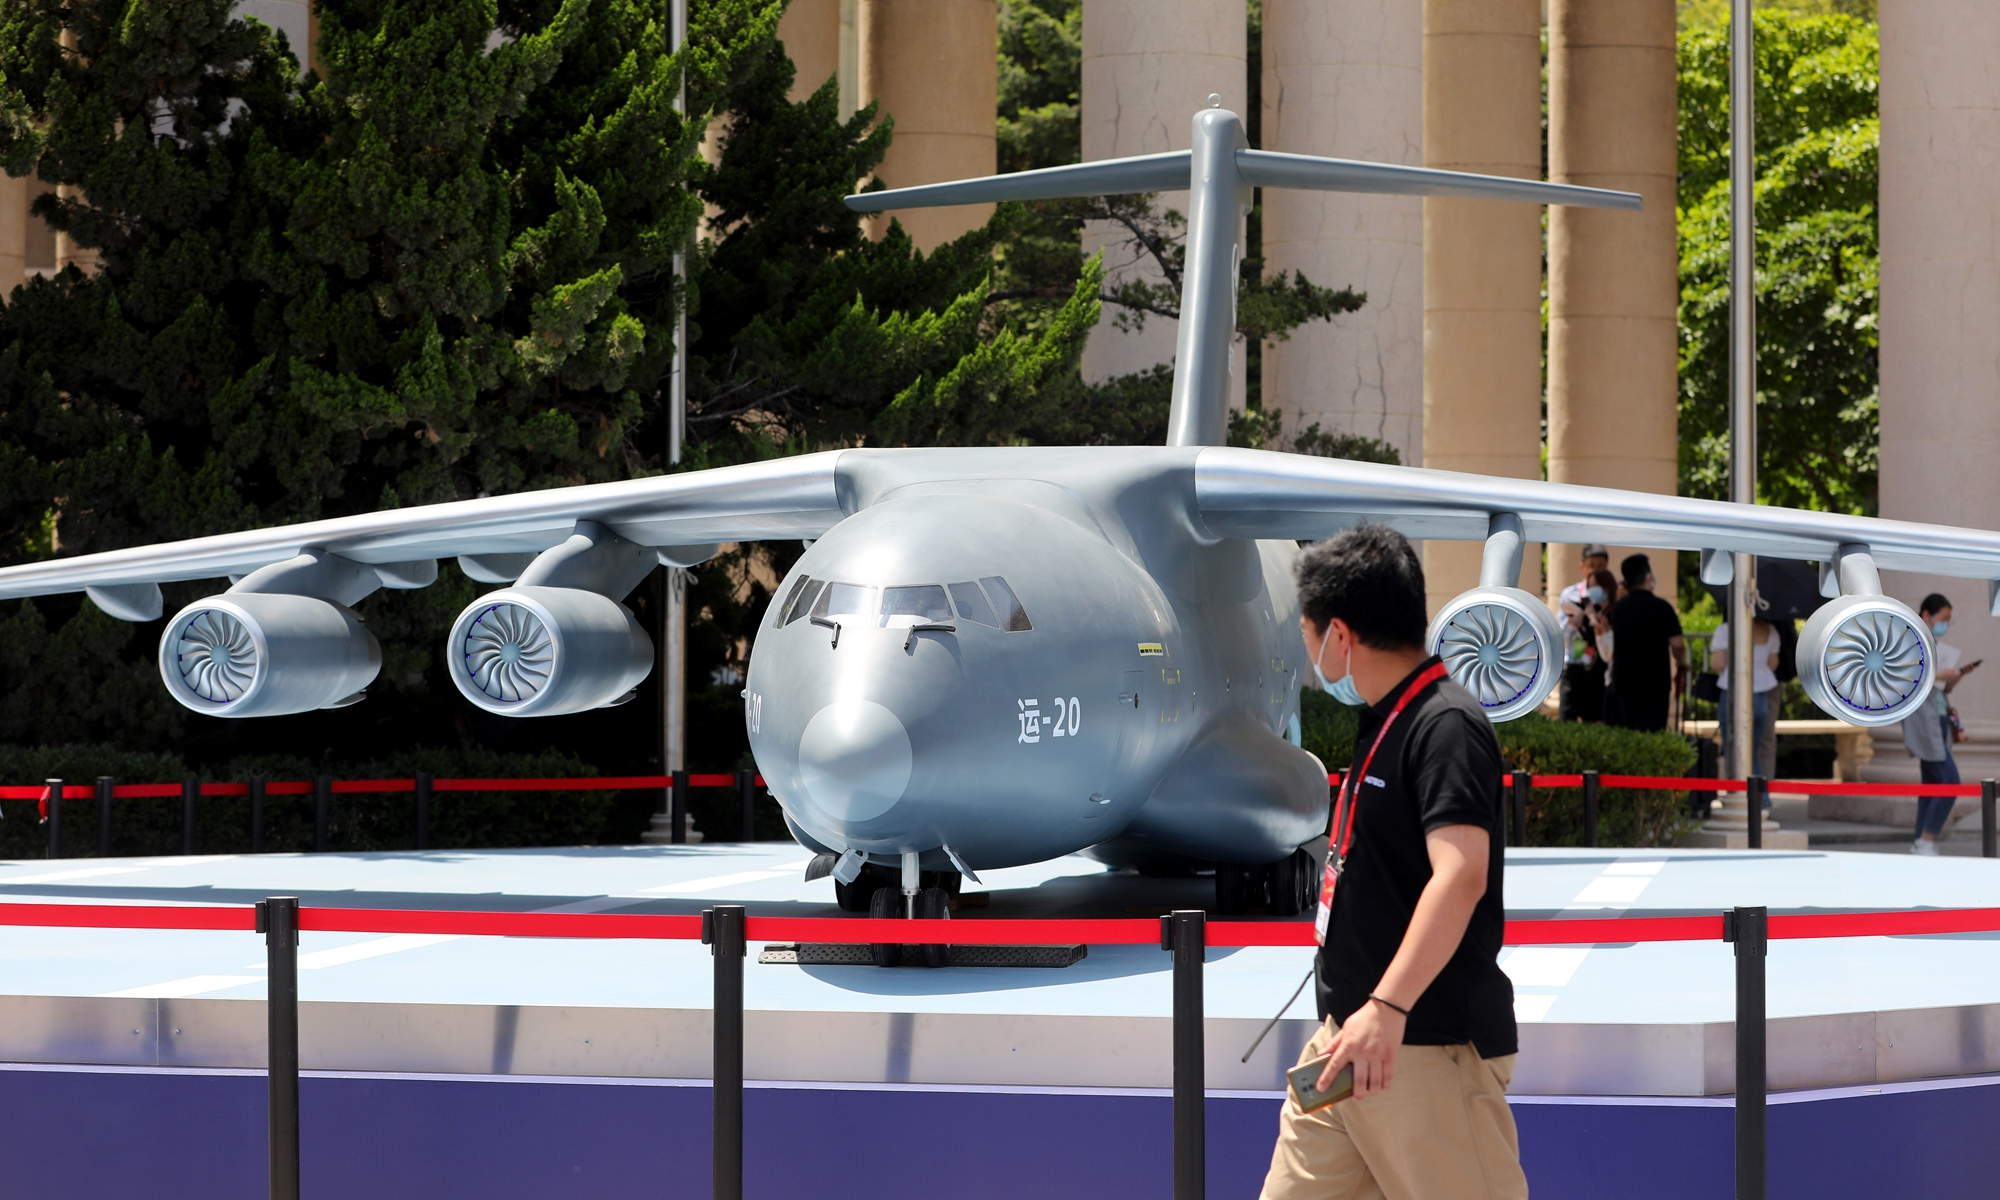 A model of the Y-20 military transport aircraft is displayed at the 2021 China Brand Day, which kicked off in Shanghai on Monday. A large number of Chinese-made equipment were on display, such as Hualong-1 nuclear reactors, Chang’e-5 spacecraft, and China’s first hydrogen engine, demonstrating the power of Chinese brands to the world. Photo: Yang Hui/GT